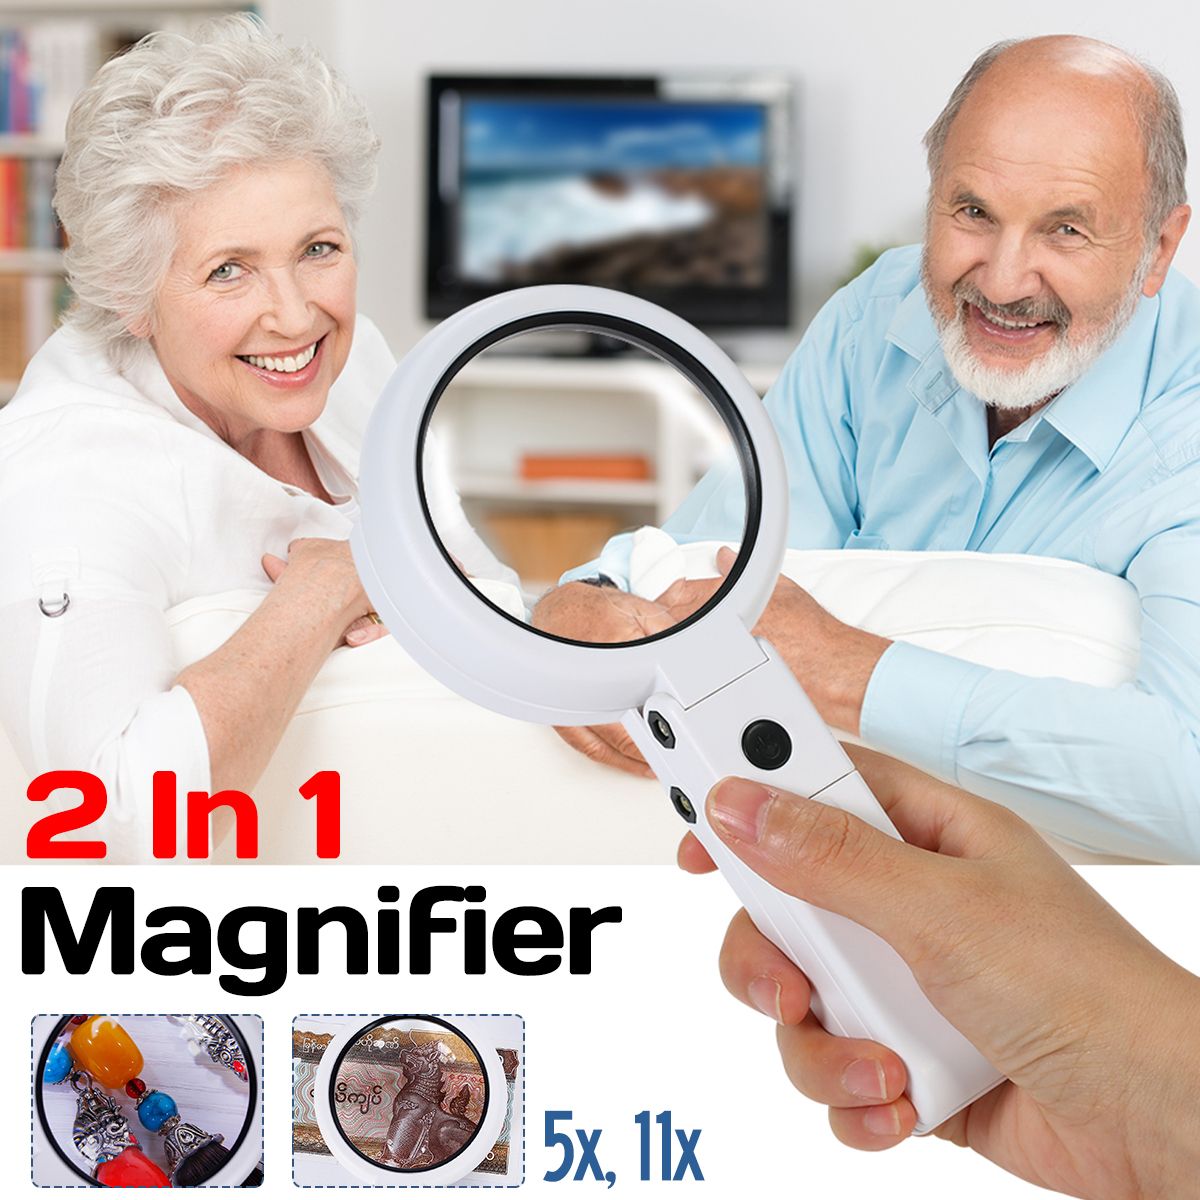 Handheld-Portable-Foldable-Lamp-Illuminated-Magnifier-5X-11X-Magnifying-Table-8-LED-Lights-Loupe-Mag-1472829